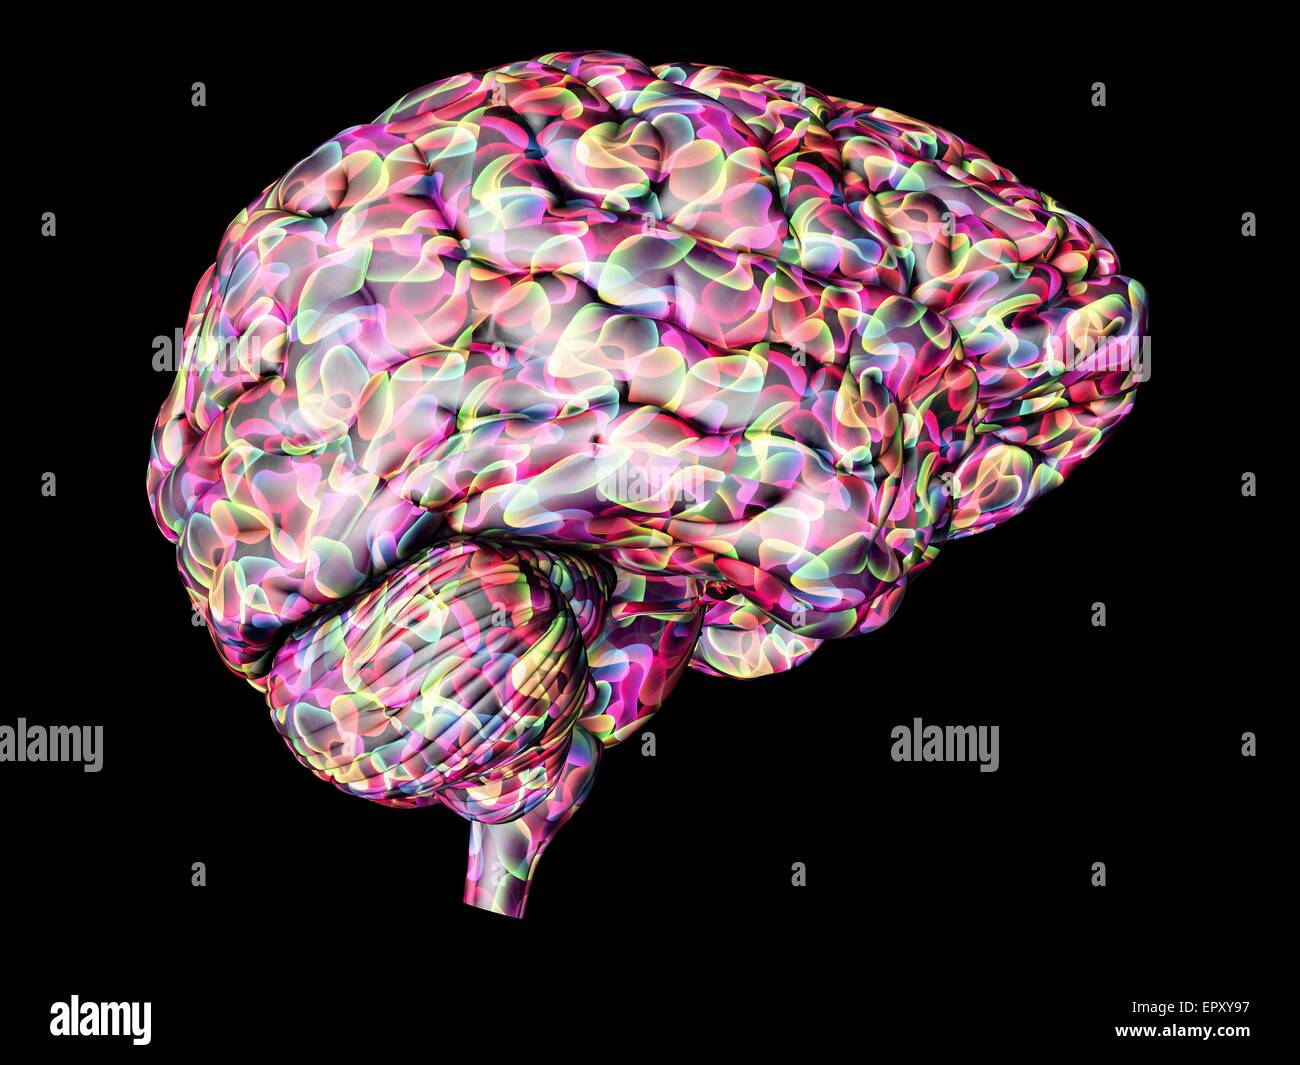 Brain. Abstract computer artwork of a side view of a human brain. Stock Photo